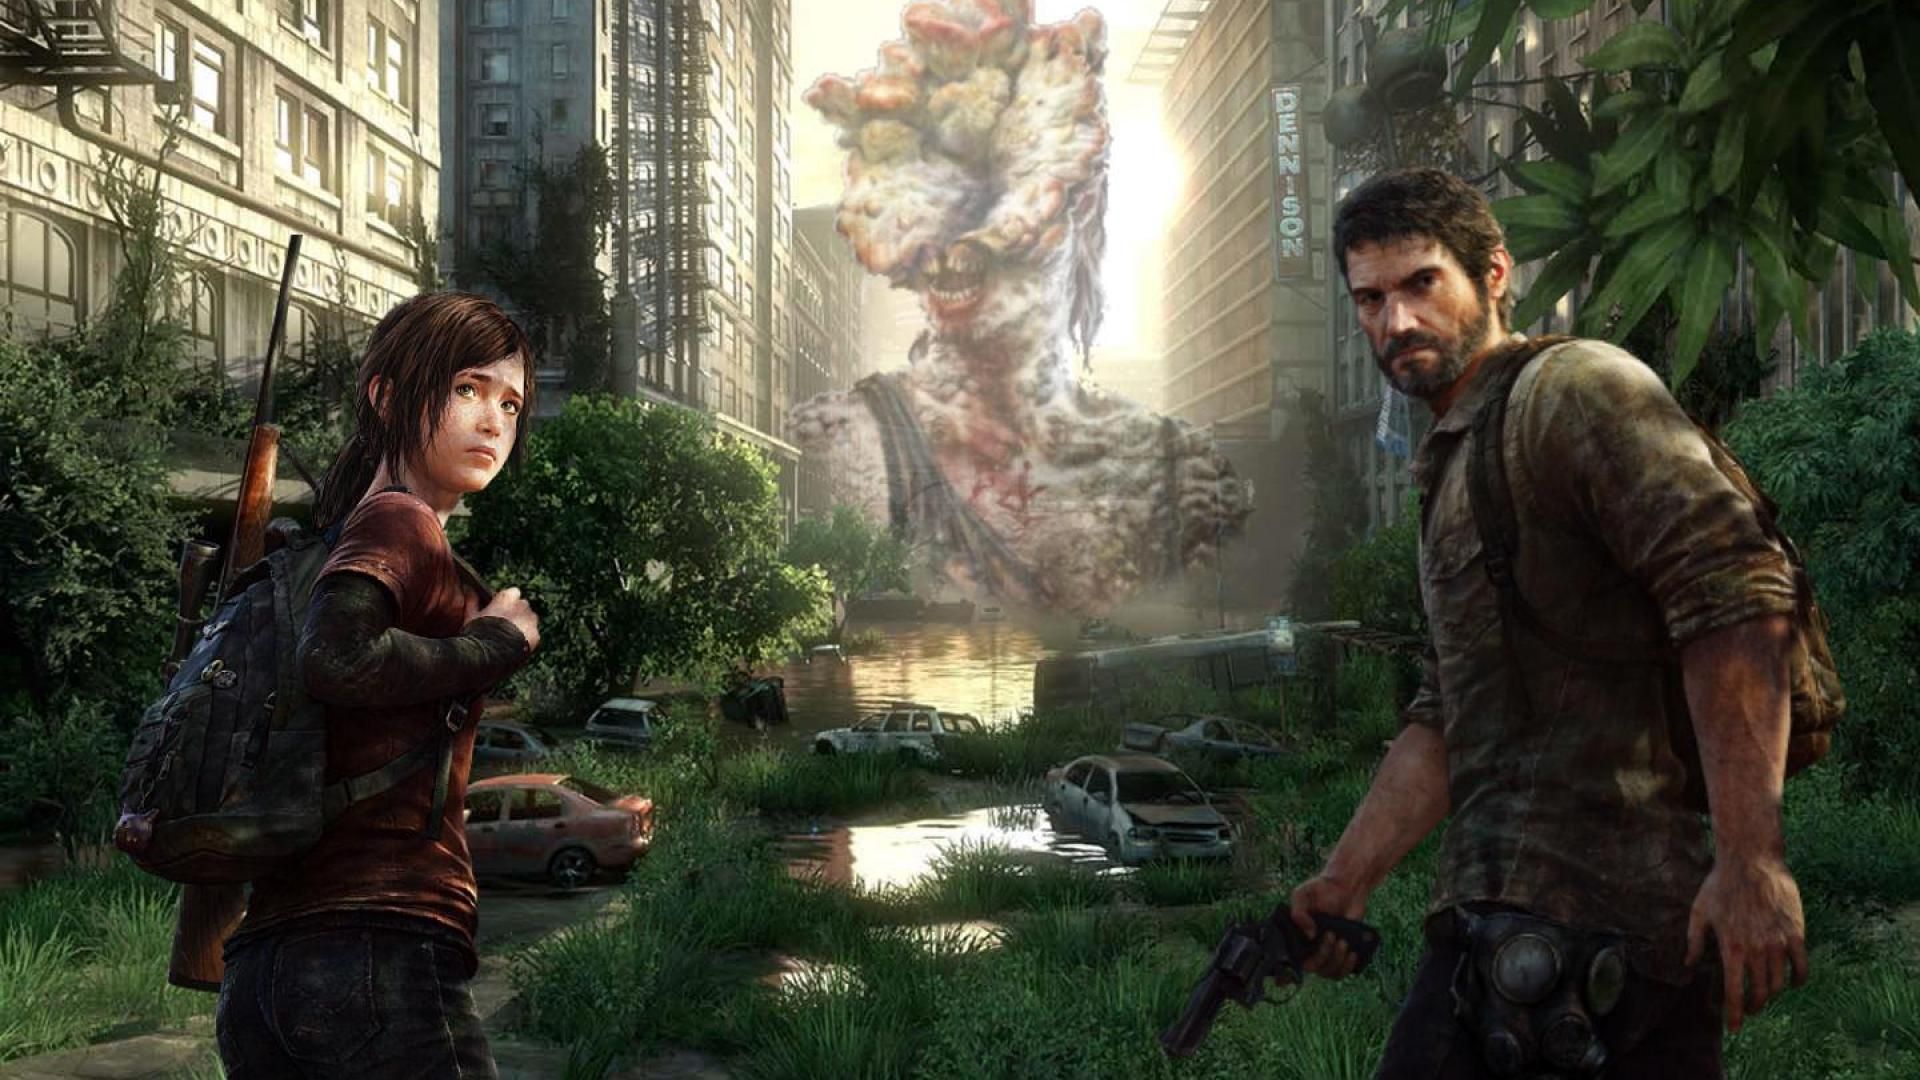 the last of us wallpaper,action adventure game,pc game,adventure game,screenshot,strategy video game